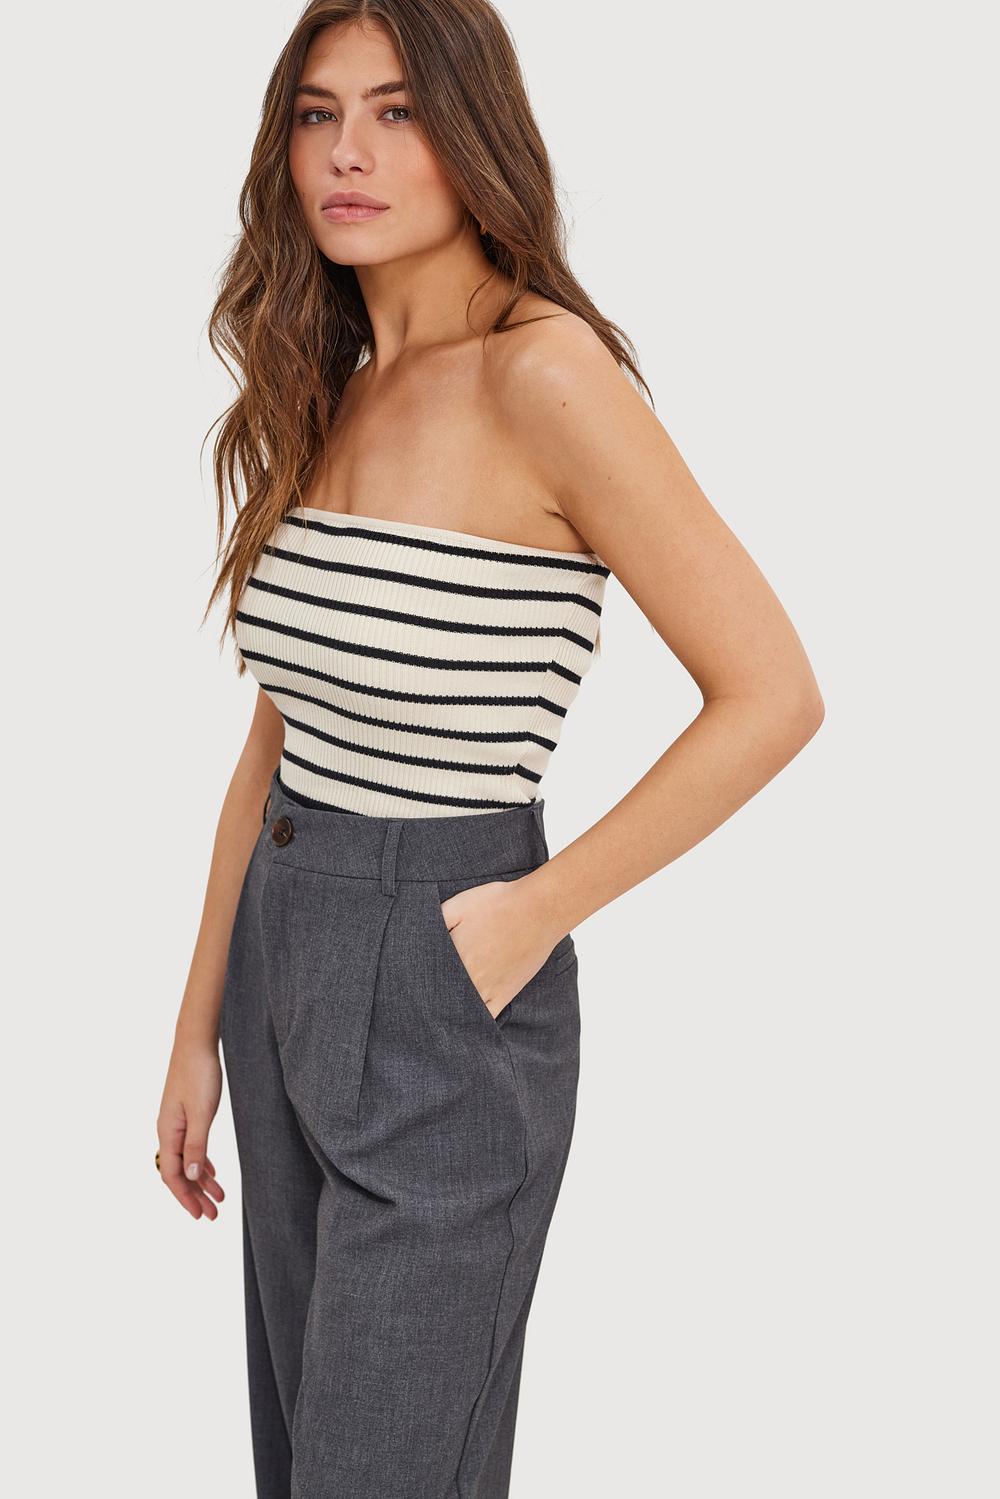 Offwhite bandeau top with stripes